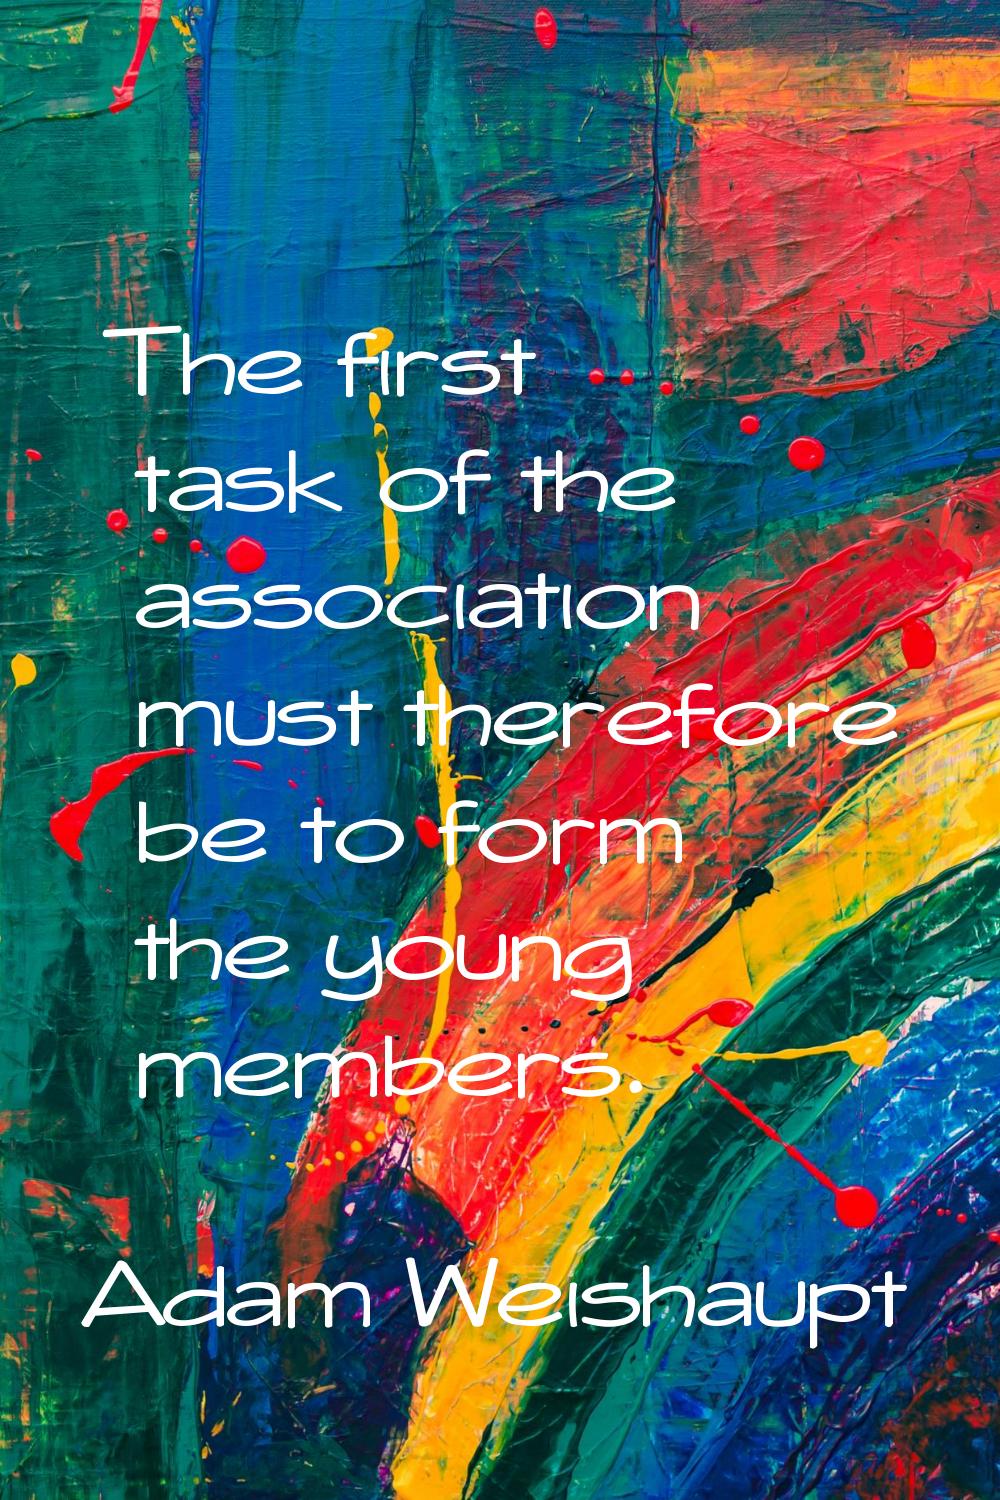 The first task of the association must therefore be to form the young members.